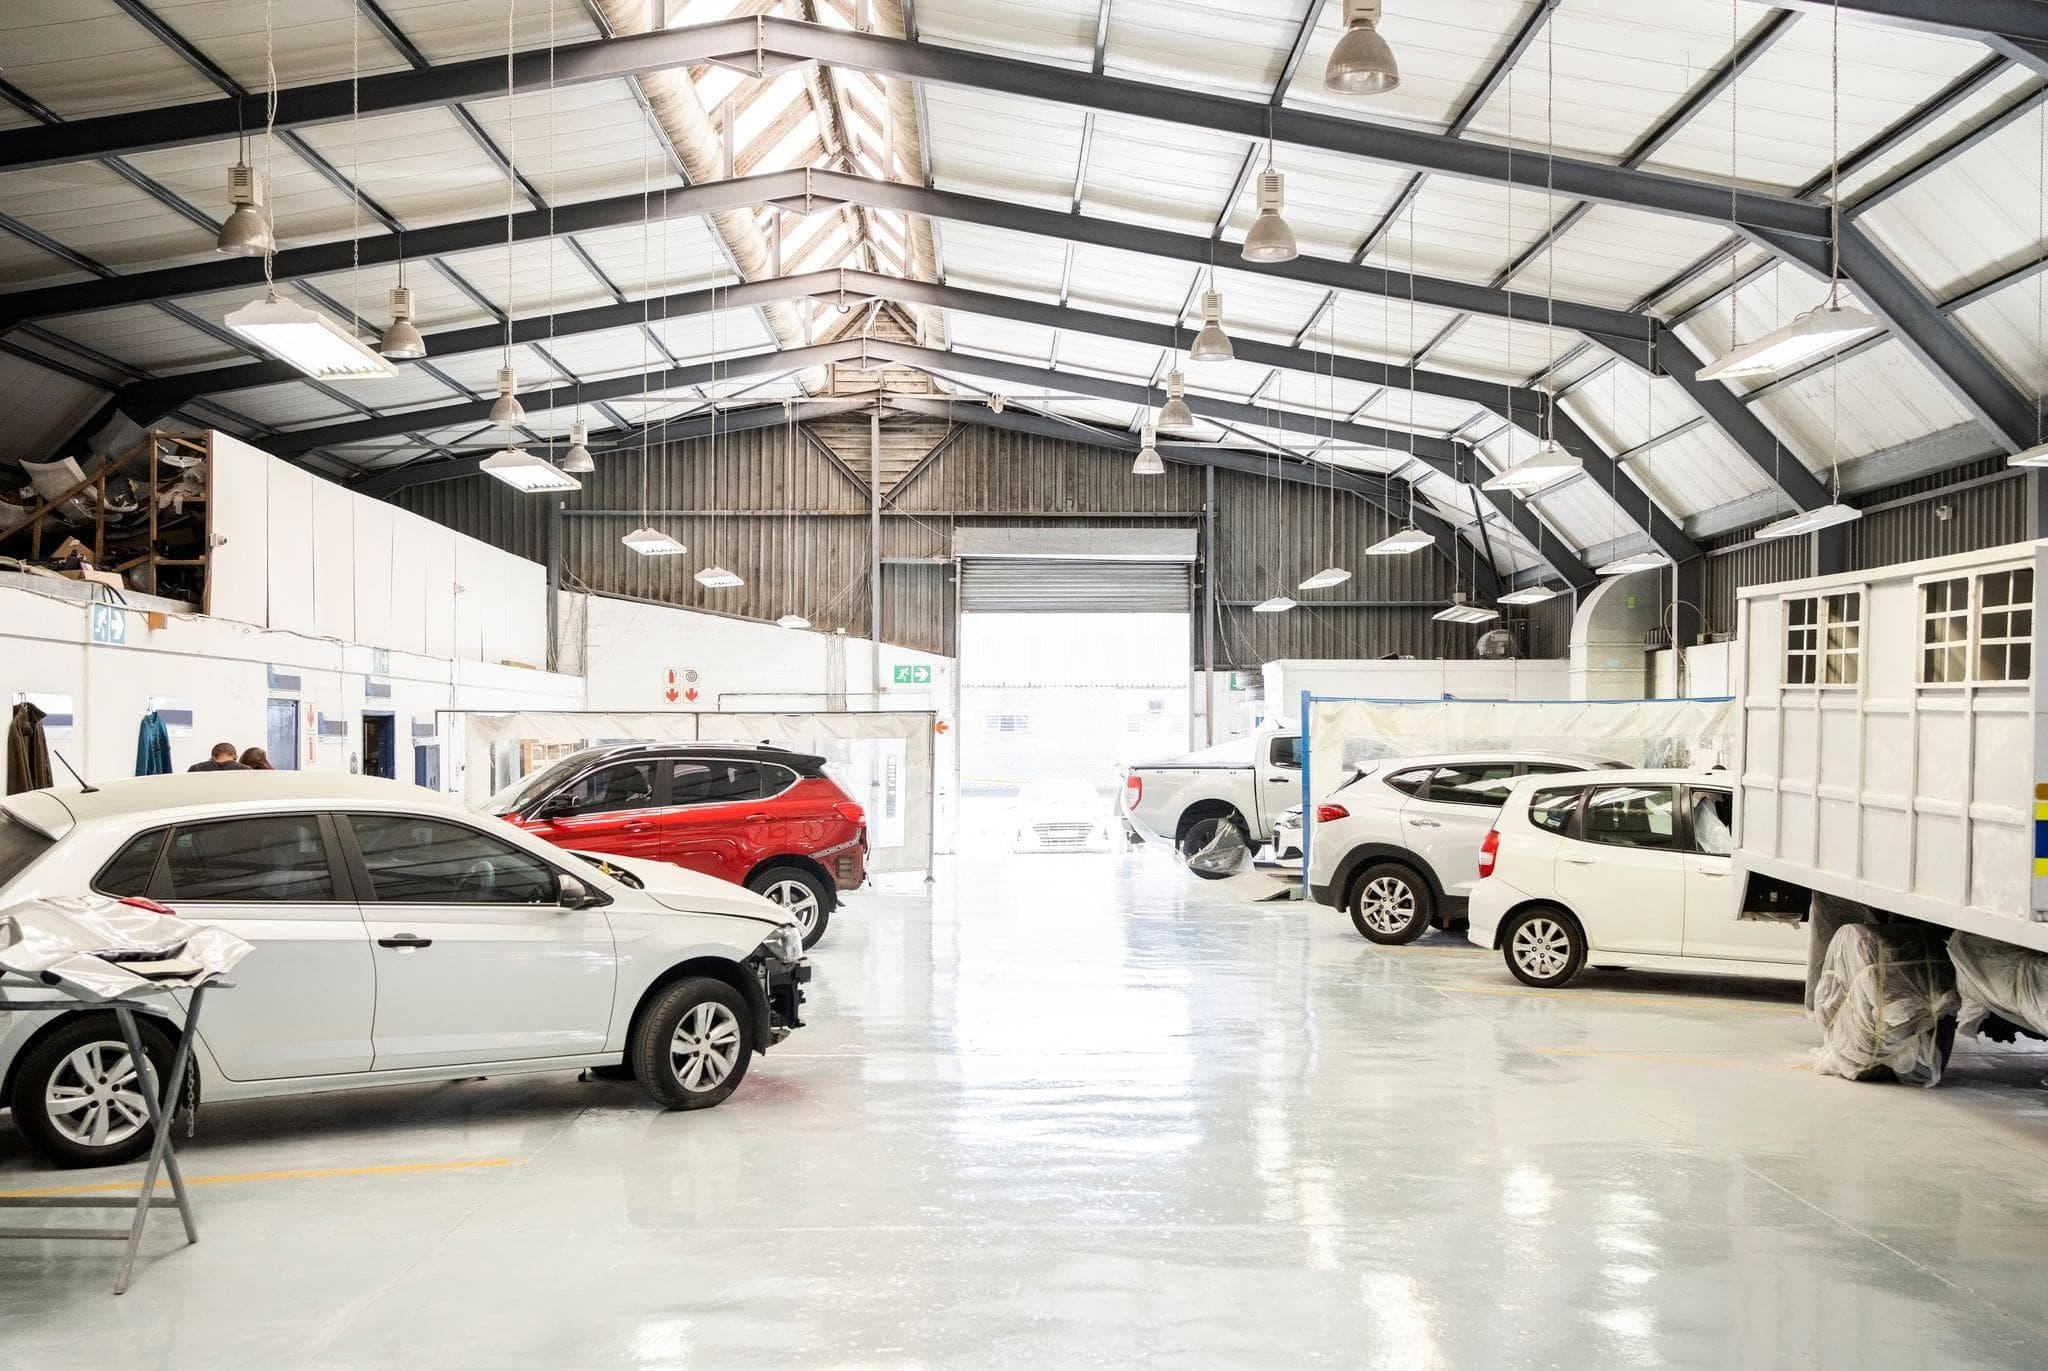 interior of an auto dealership service center with commercial overhead doors